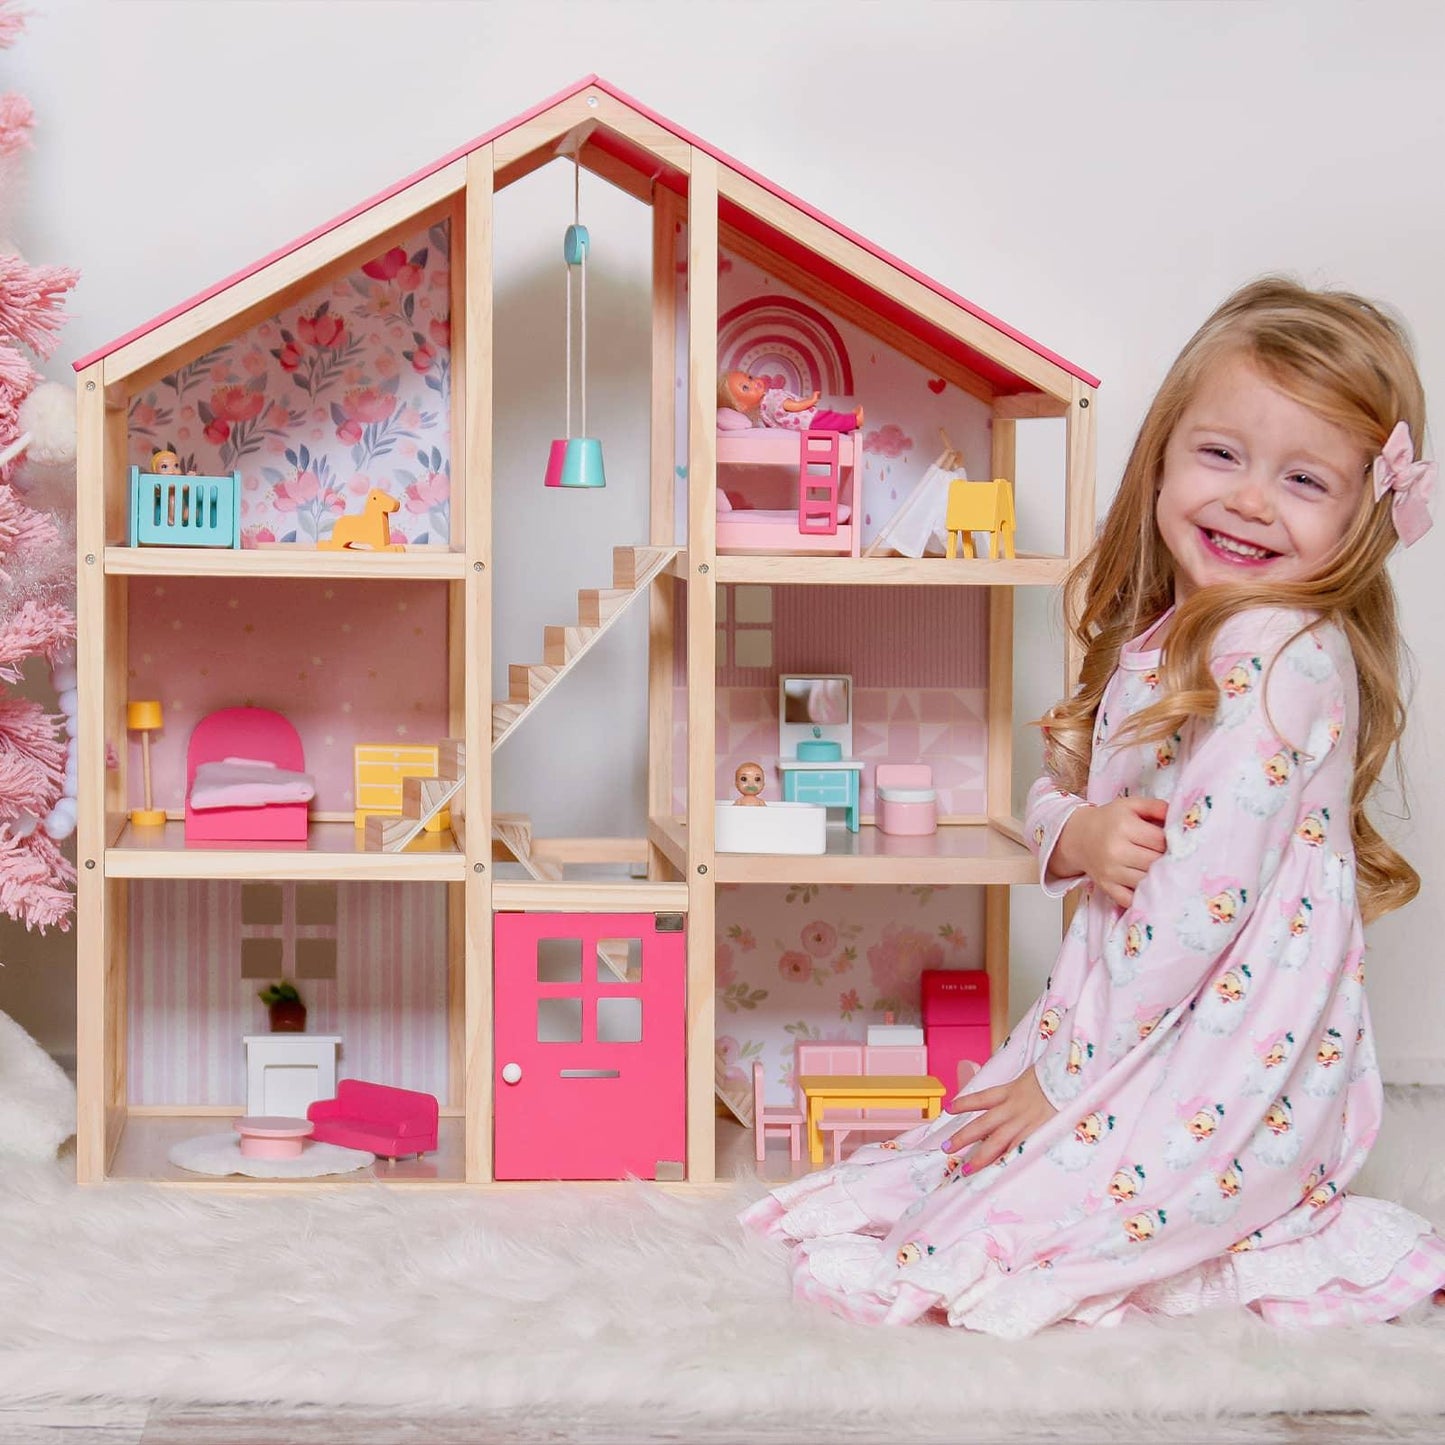 Tiny Land® Love Dollhouse with 30 Furniture